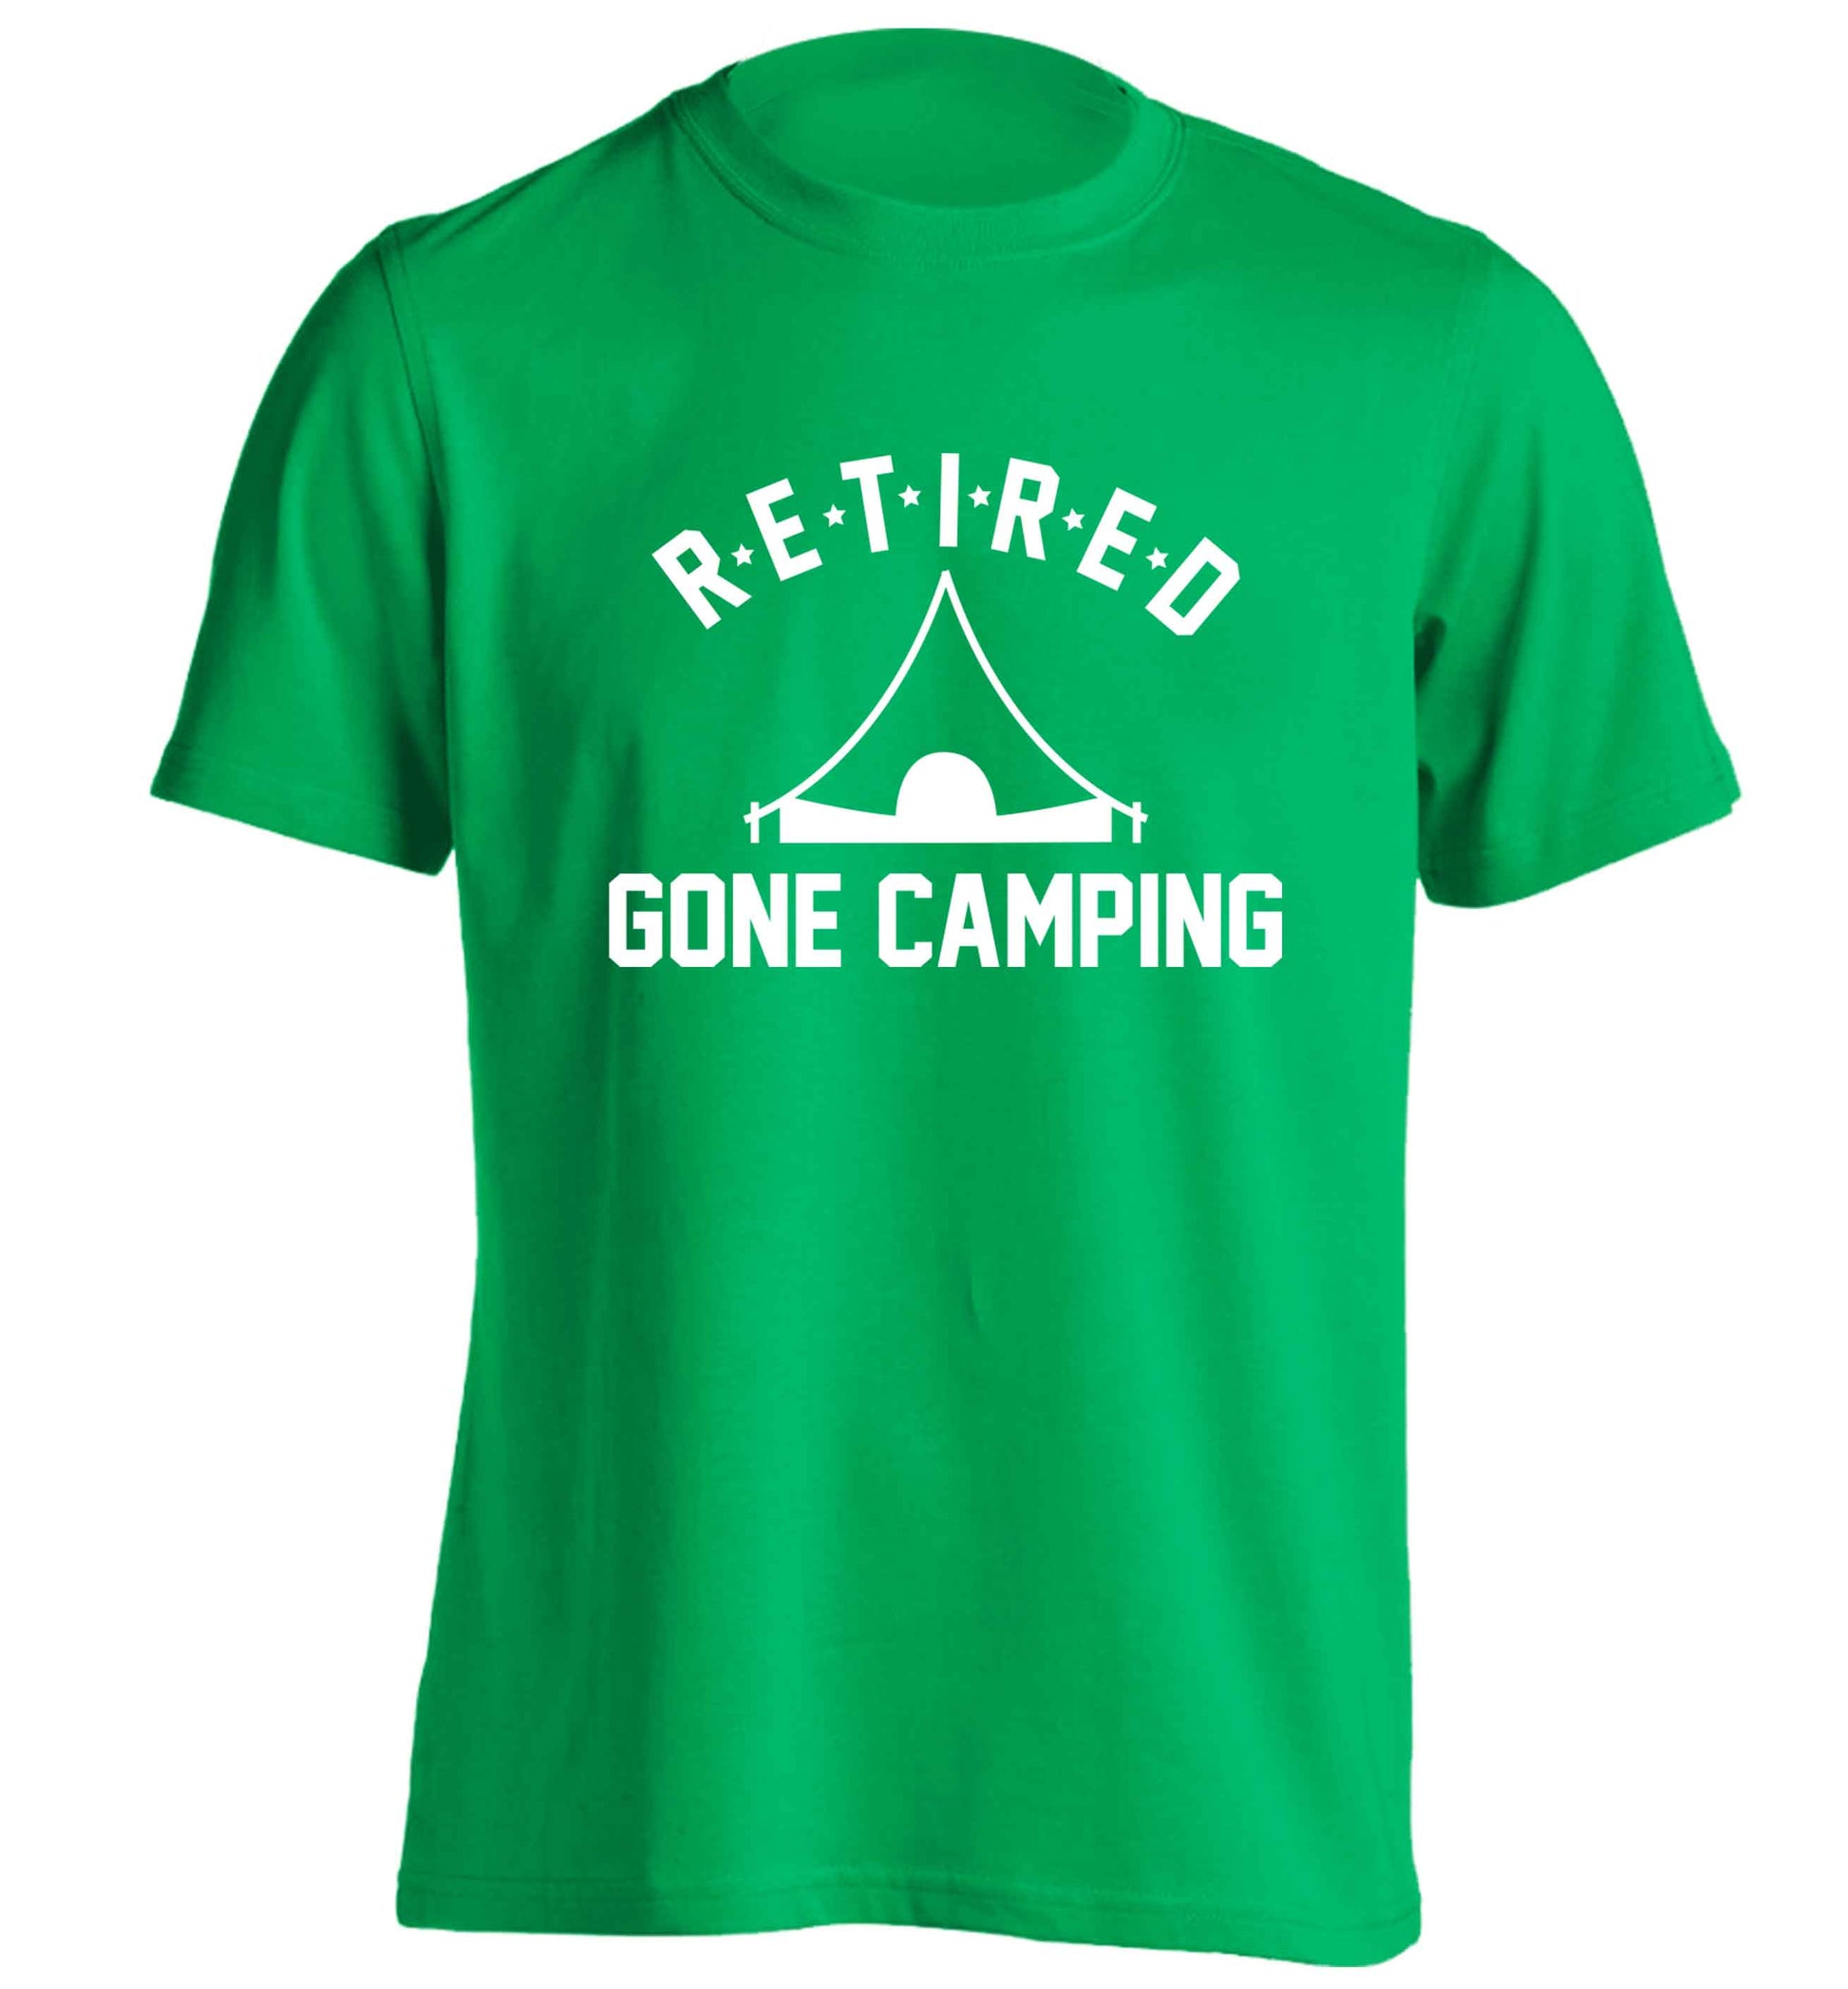 Retired gone camping adults unisex green Tshirt 2XL